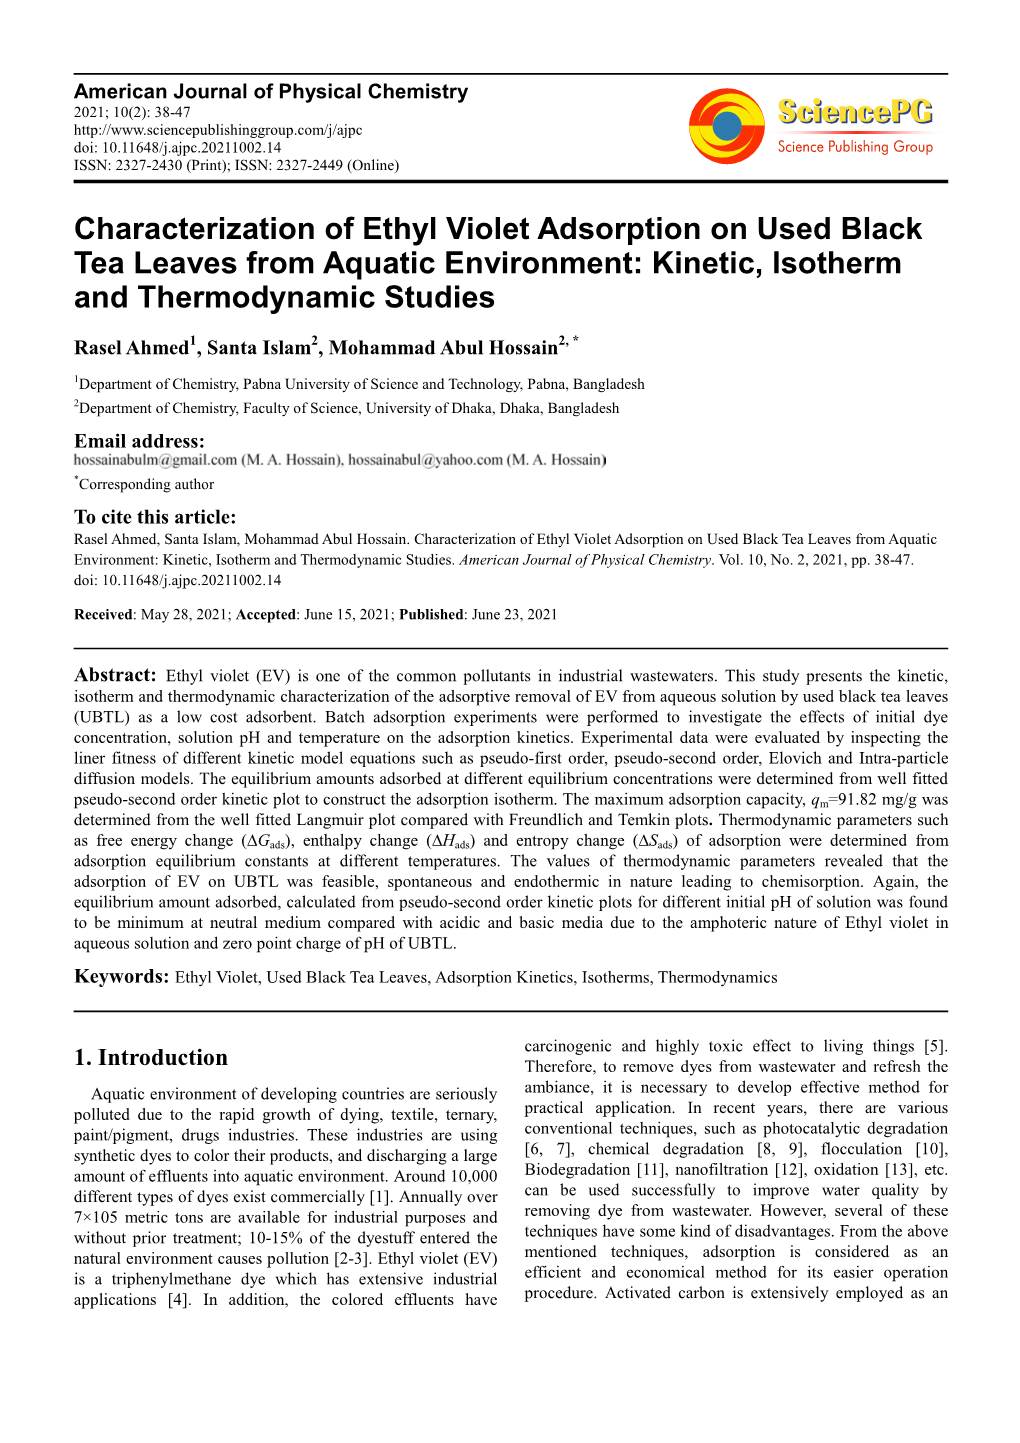 Characterization of Ethyl Violet Adsorption on Used Black Tea Leaves from Aquatic Environment: Kinetic, Isotherm and Thermodynamic Studies